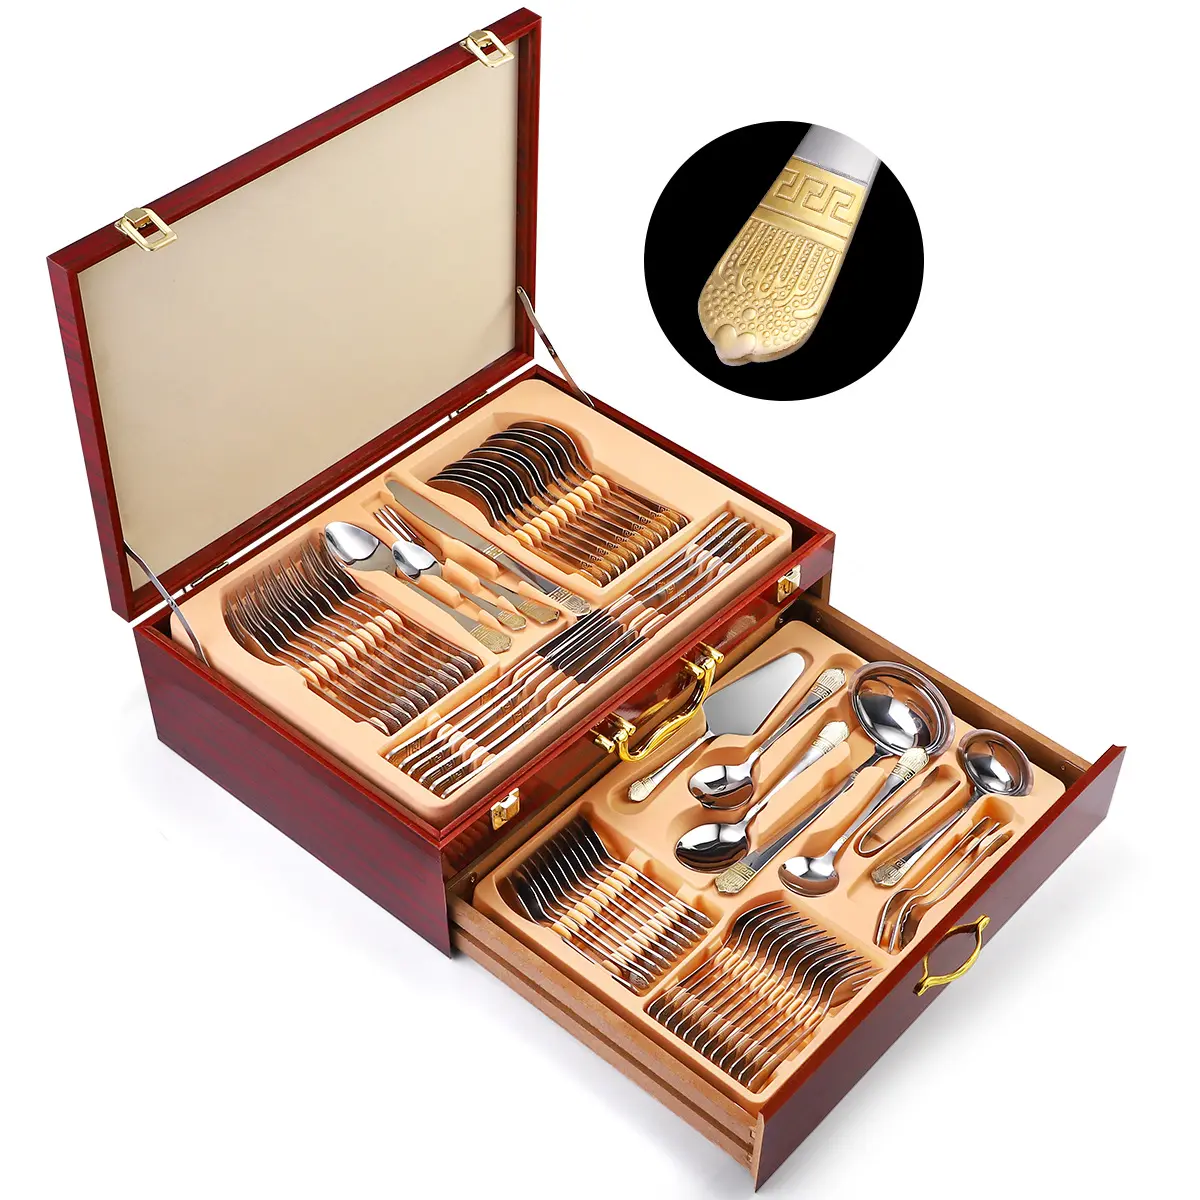 Factory Price 72 pcs Cutlery Set 84pcs Flatware Set Stainless Steel Tableware with Case Dinner Set